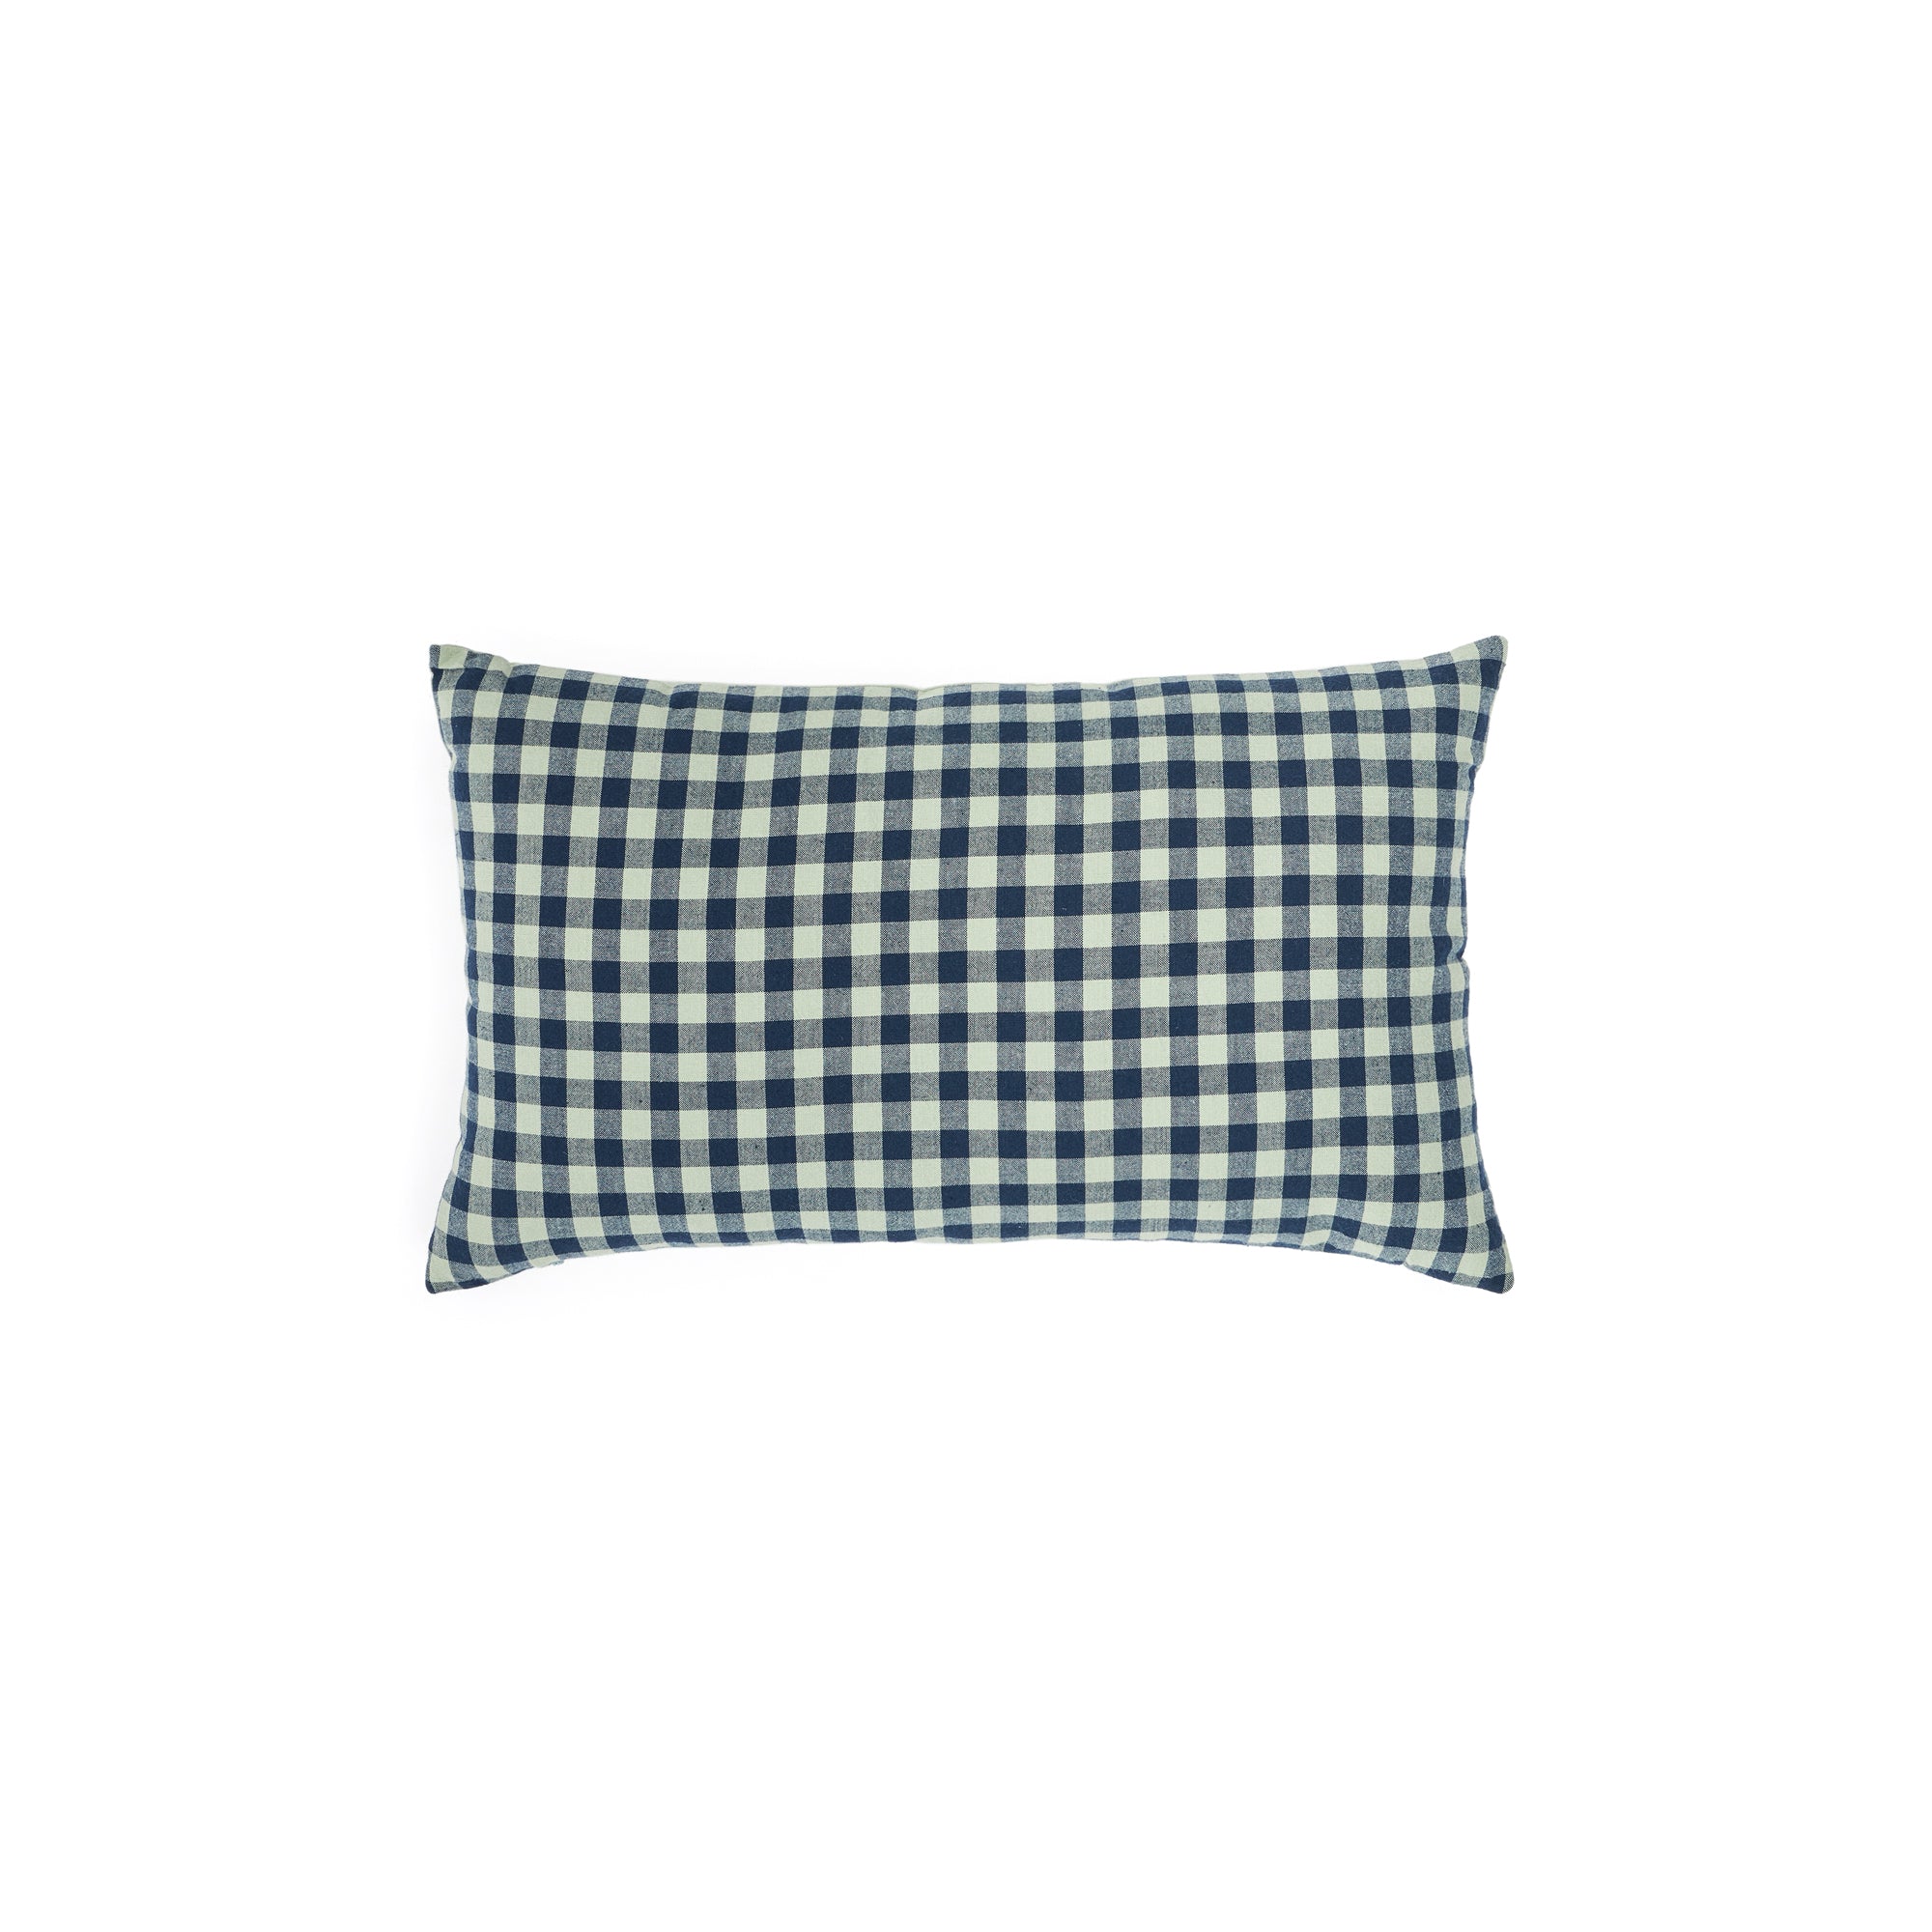 Yanil cushion cover 100% cotton green and blue squares 30 x 50 cm